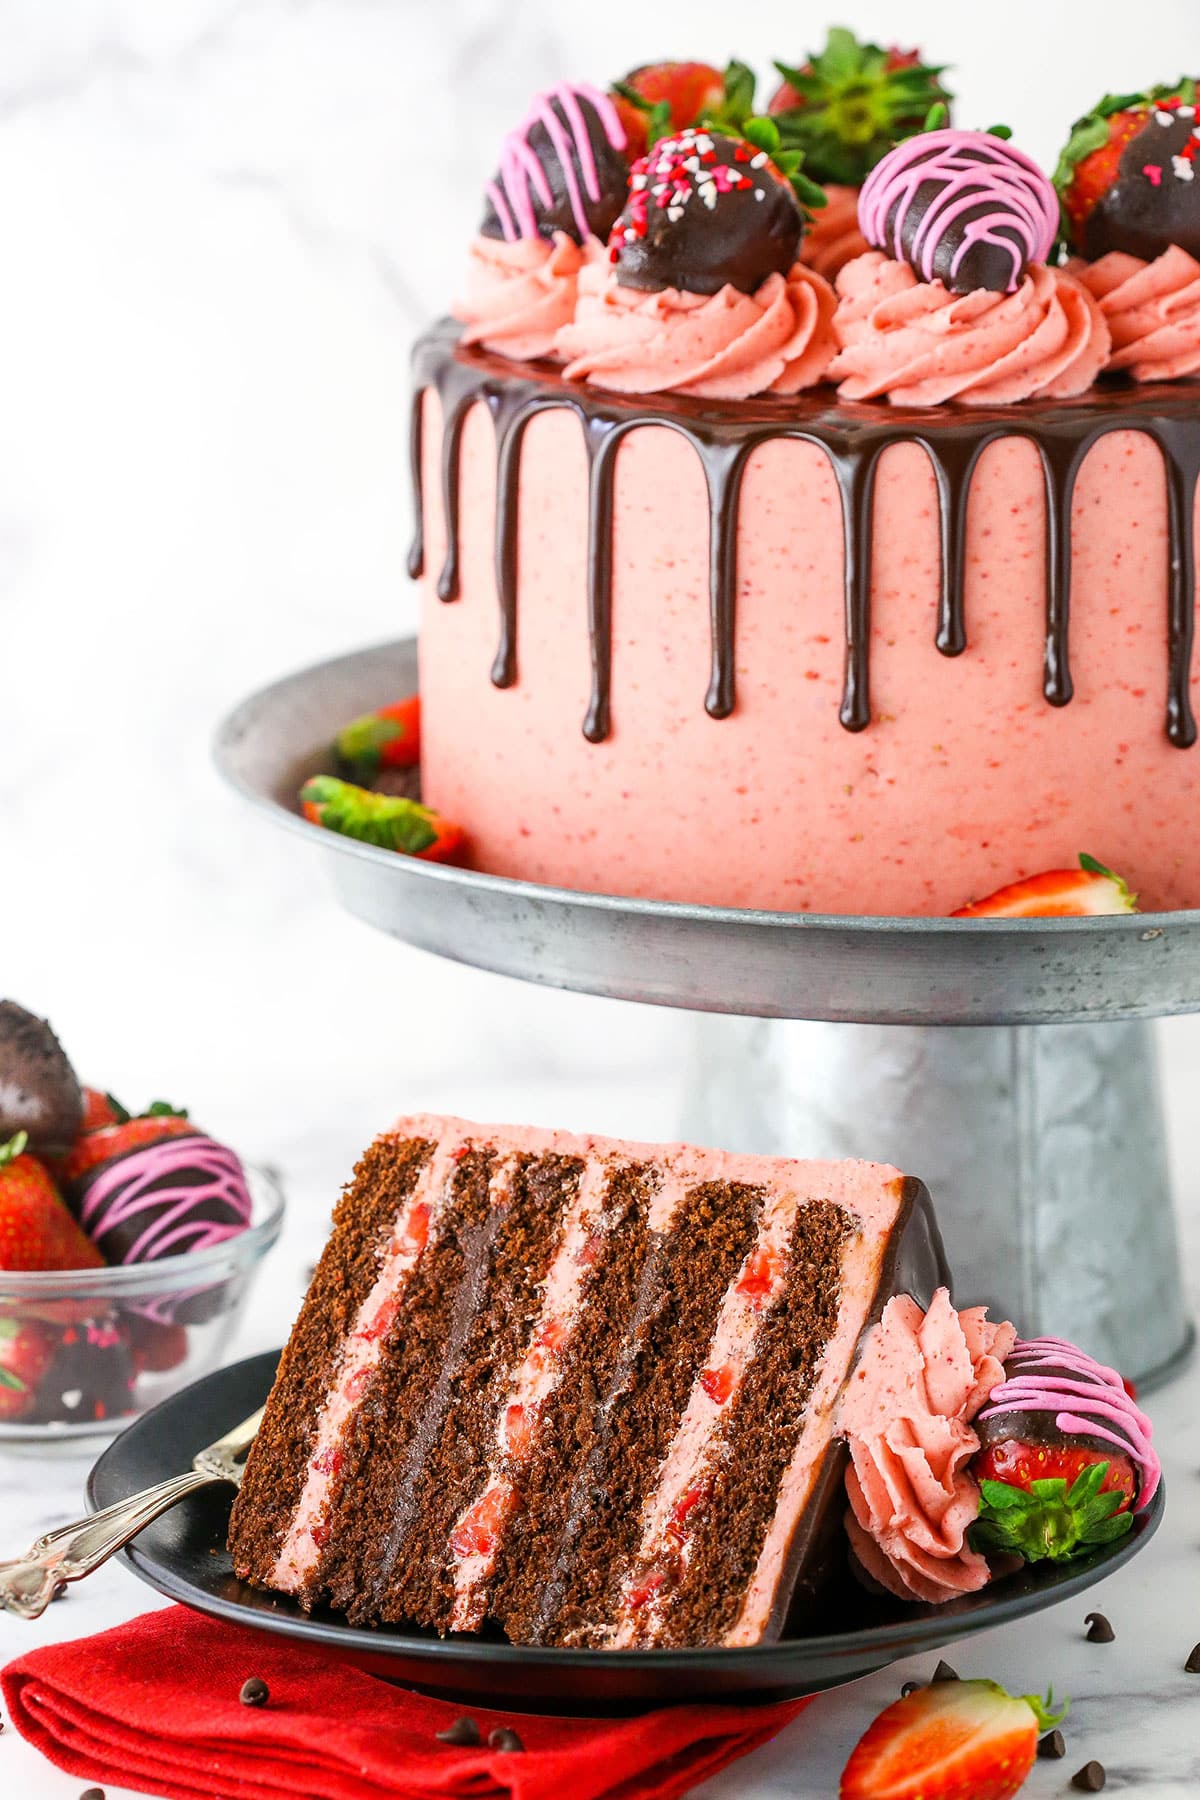 A slice of Chocolate Covered Strawberry Layer Cake with a fork on a black plate with the Chocolate Covered Strawberry Layer Cake on a metal cake stand in the background